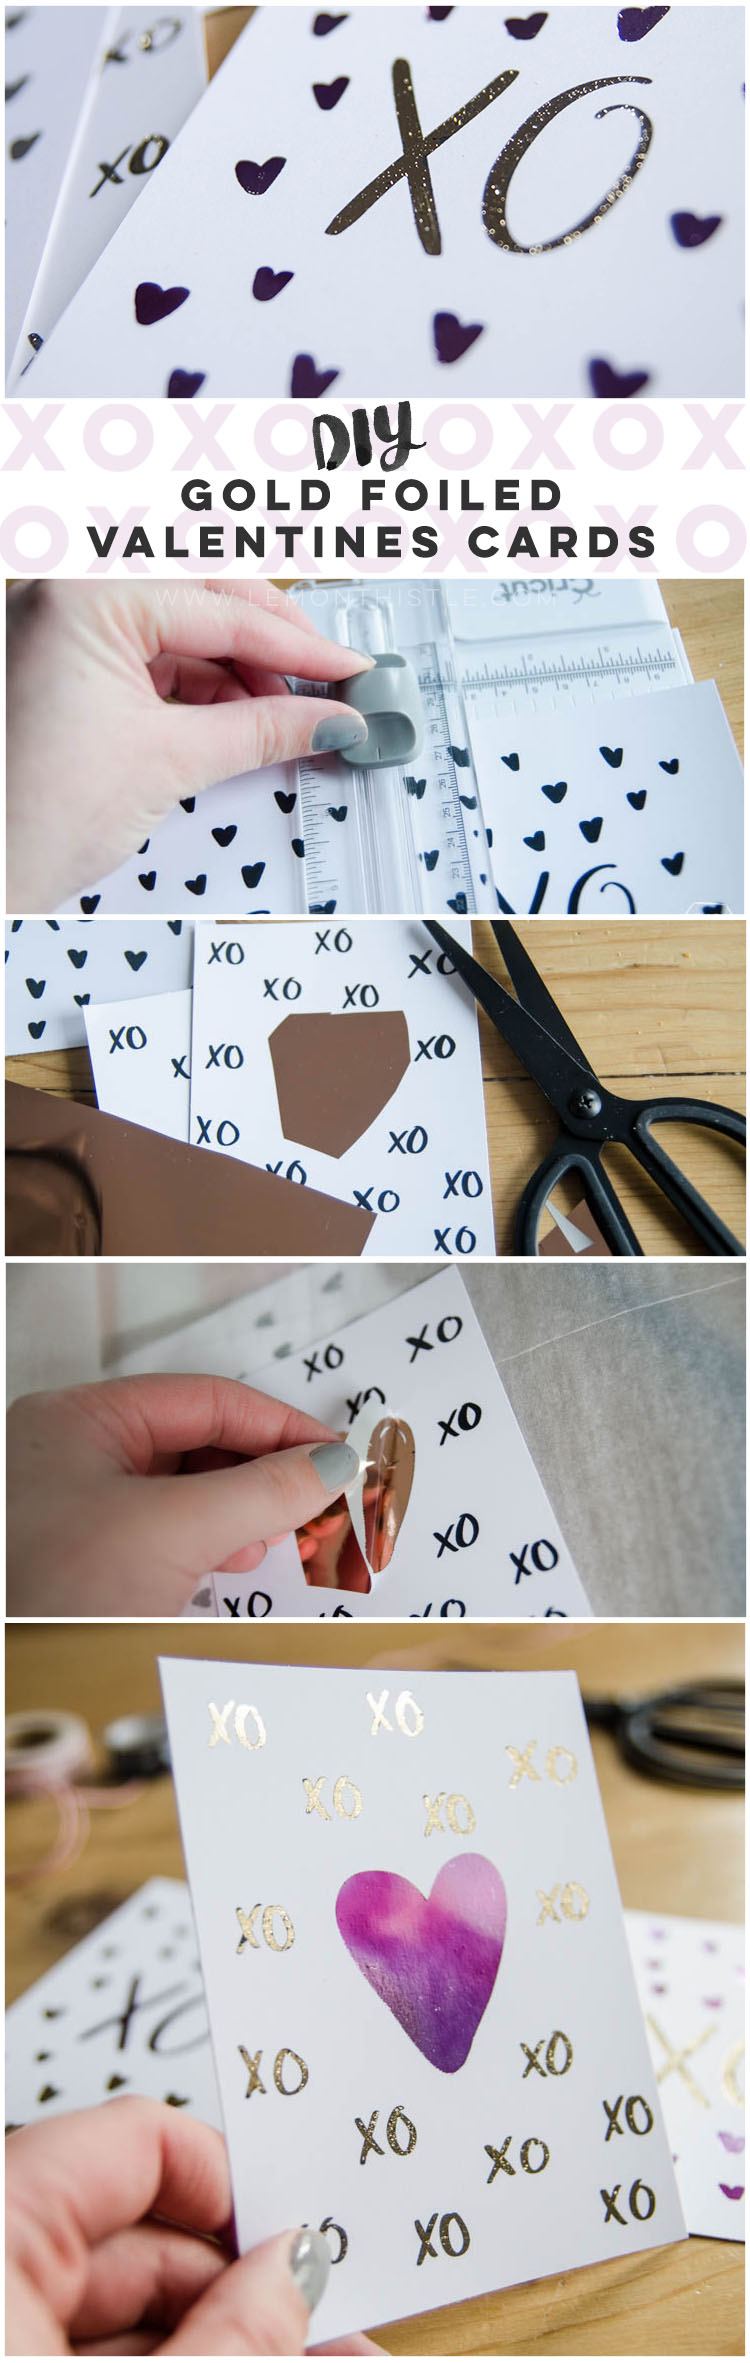 DIY Foiled Valentines Day Cards- I love that purple foil! Plus I love that you can do this with a simple laminator 